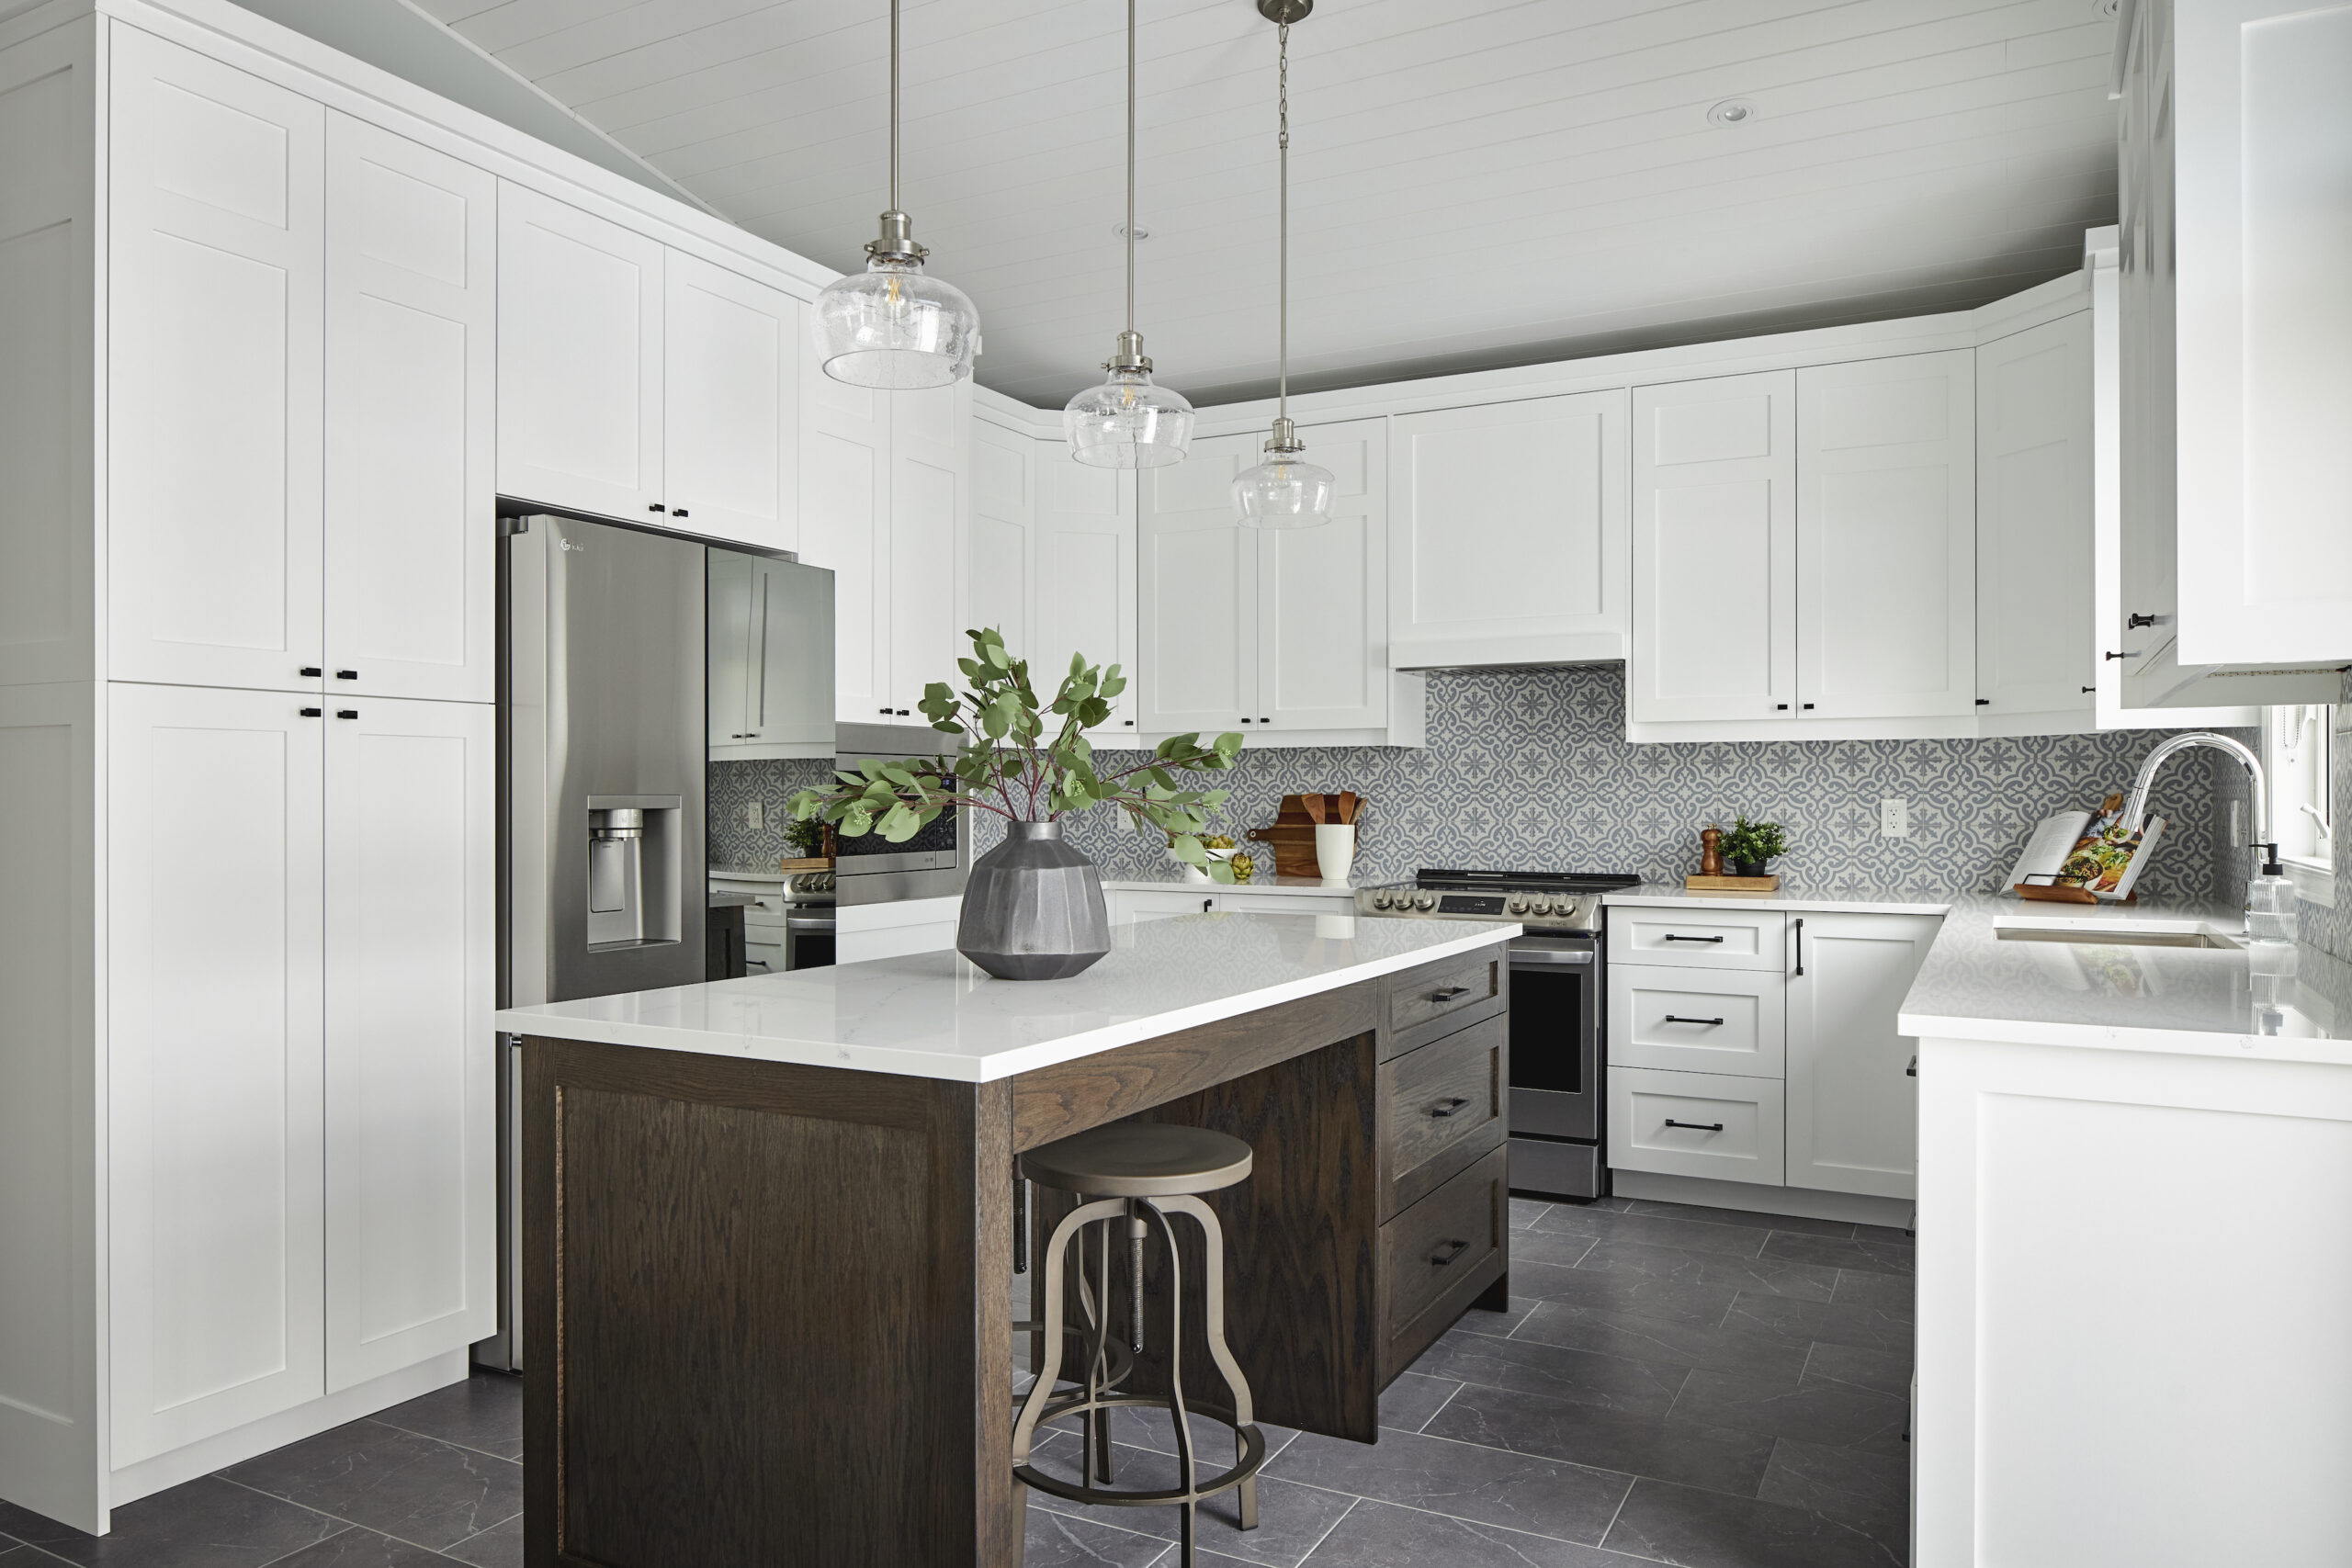 Designer kitchen renovation with white cabinetry and patterned backsplash. A dark island in the centre of the kitchen brings contrast to the space.